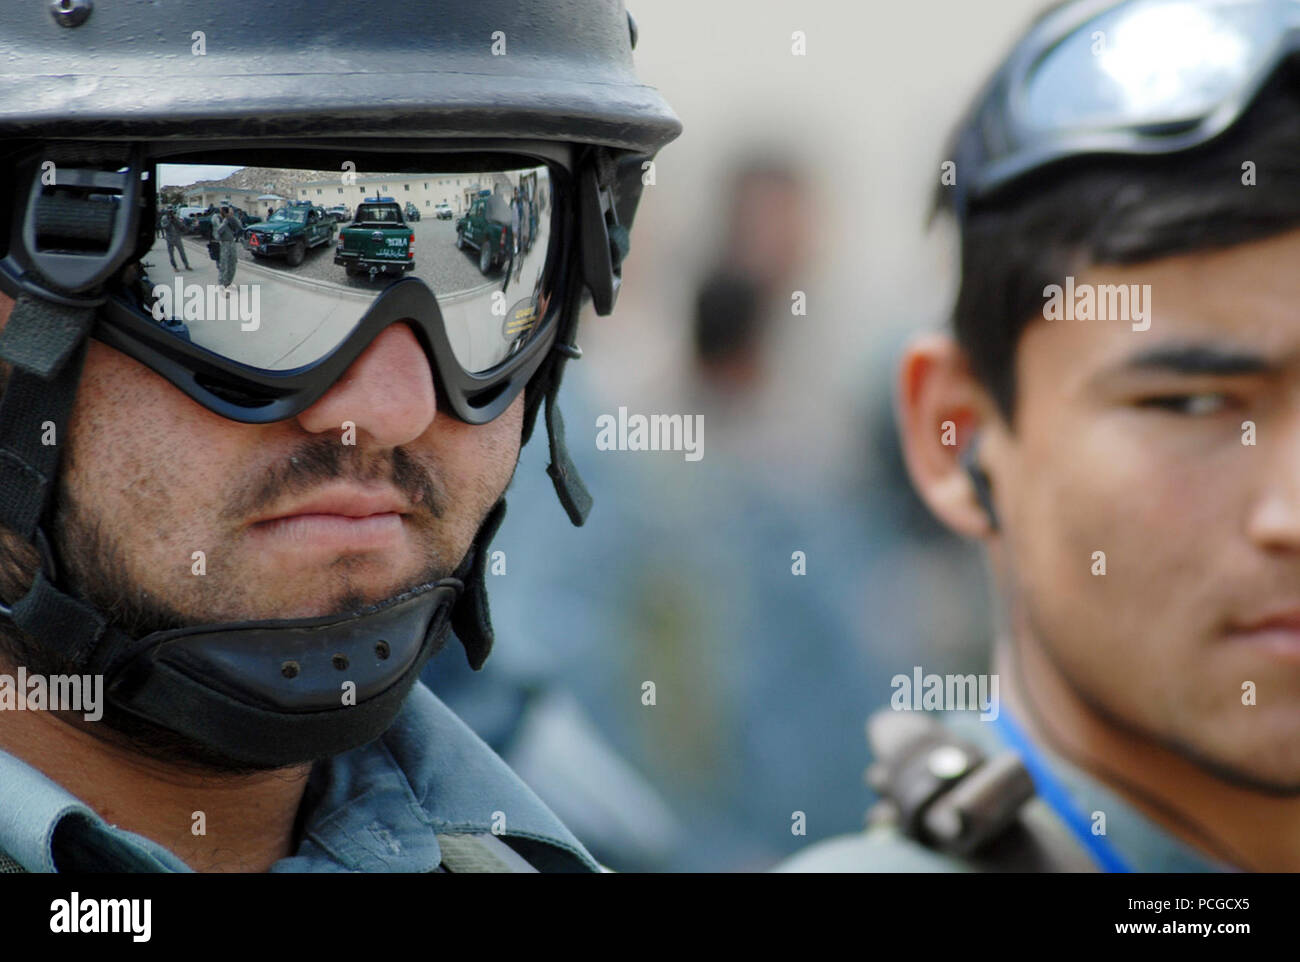 KABUL, Afghanistan (April 18, 2010) – A member of the Afghan National Civil Order Police (ANCOP), reflects his surroundings while waiting for the next training evolution at a Kabul facility.  The police officers registered and received briefings and training as they prepare for operations in Afghanistan. (US Navy Stock Photo